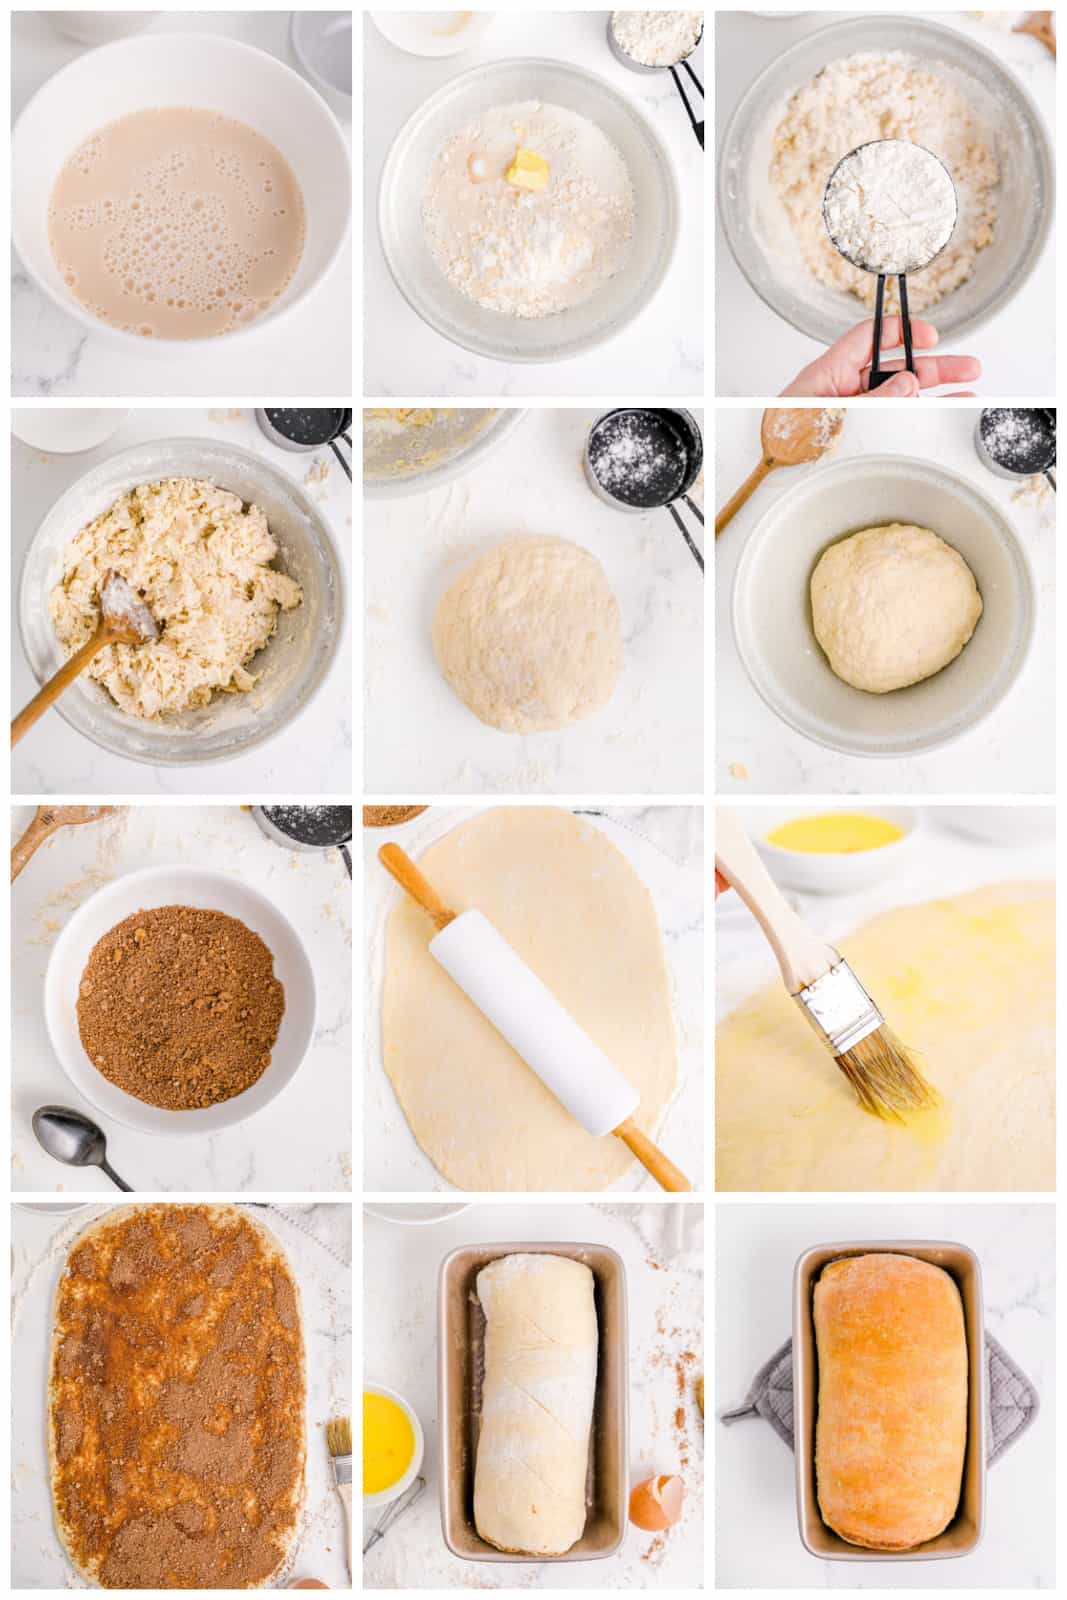 Step by step photos on how to make Cinnamon Swirl Bread.